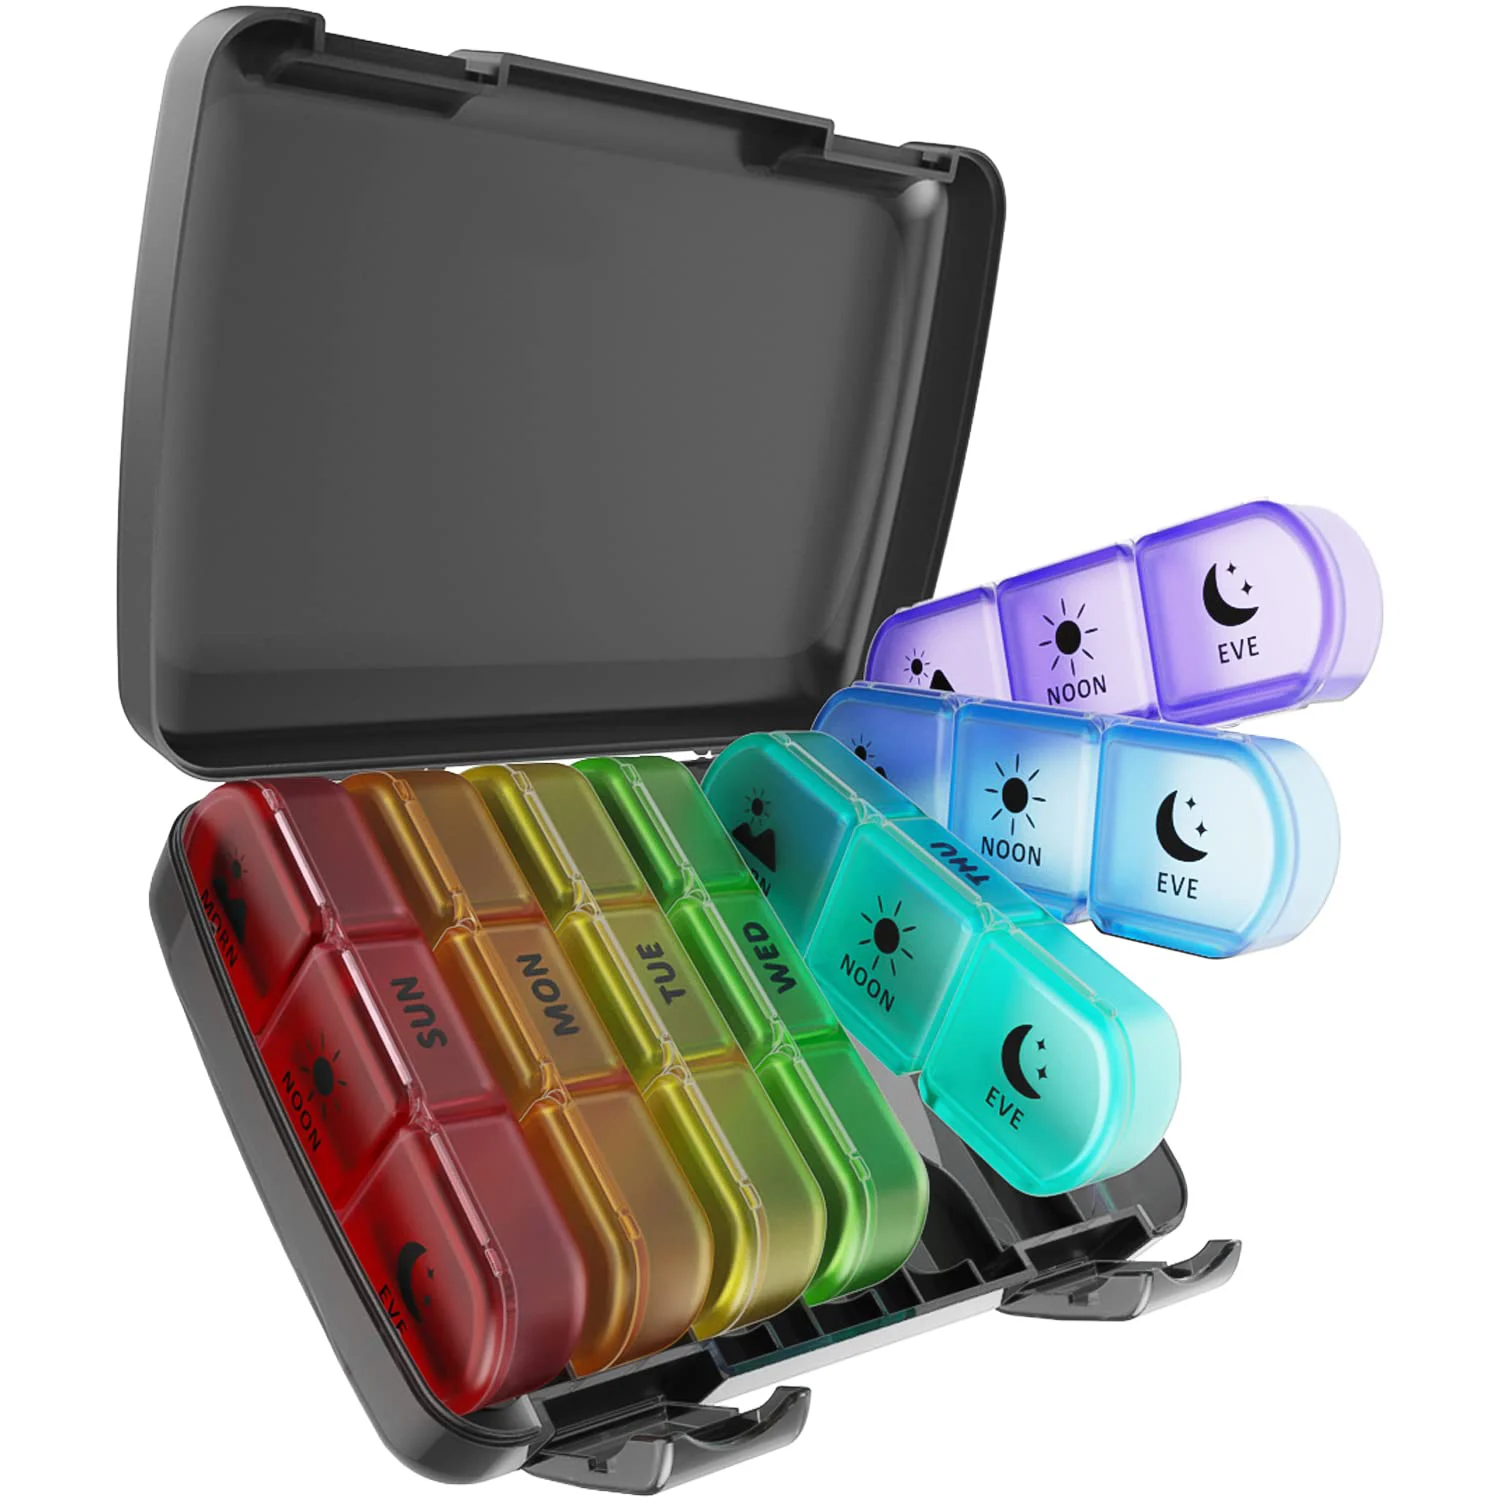 

Large Capacity Plastic Pill Medicine Organizer Box Outdoor Travel Weekly Tablet Vitamin Pills Container 21 Grids Medication Box